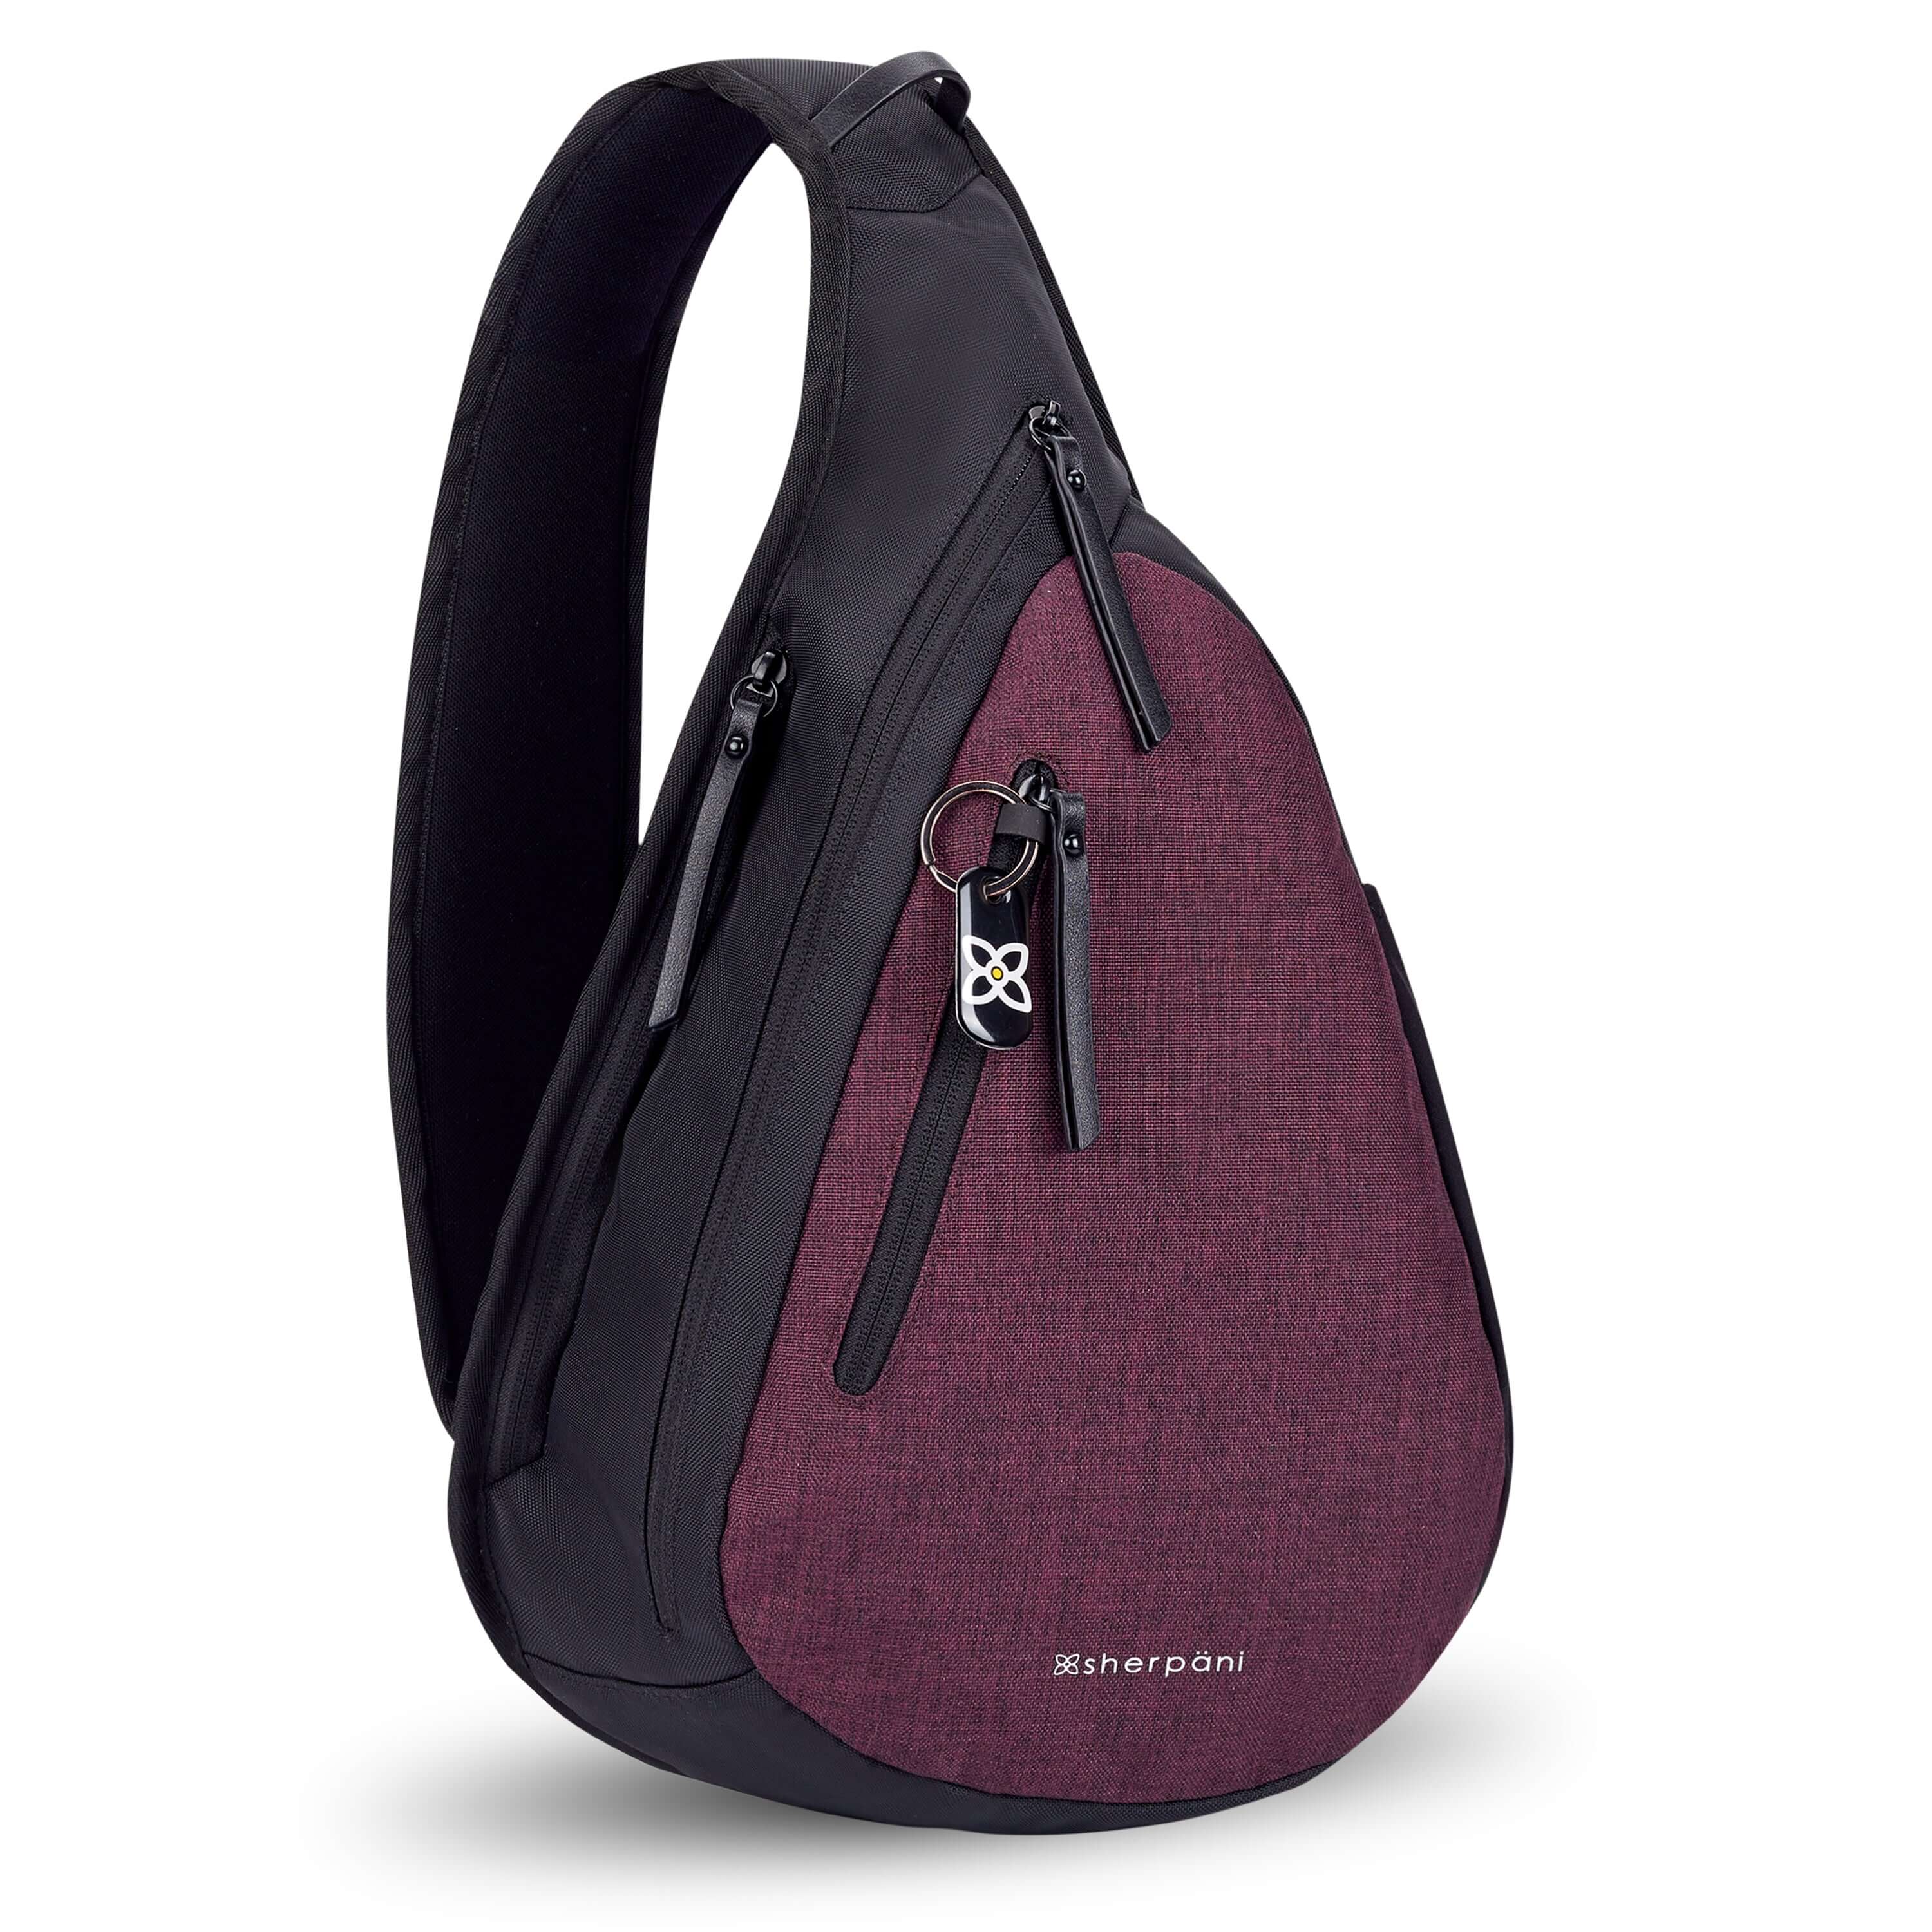  Angled front view of Sherpani&#39;s Anti-Theft bag, the Esprit AT in Merlot, with vegan leather accents in black. There is a locking zipper compartment on the front, and two more zipper compartments on the side. An elastic water bottle holder sits on the other side of the bag.